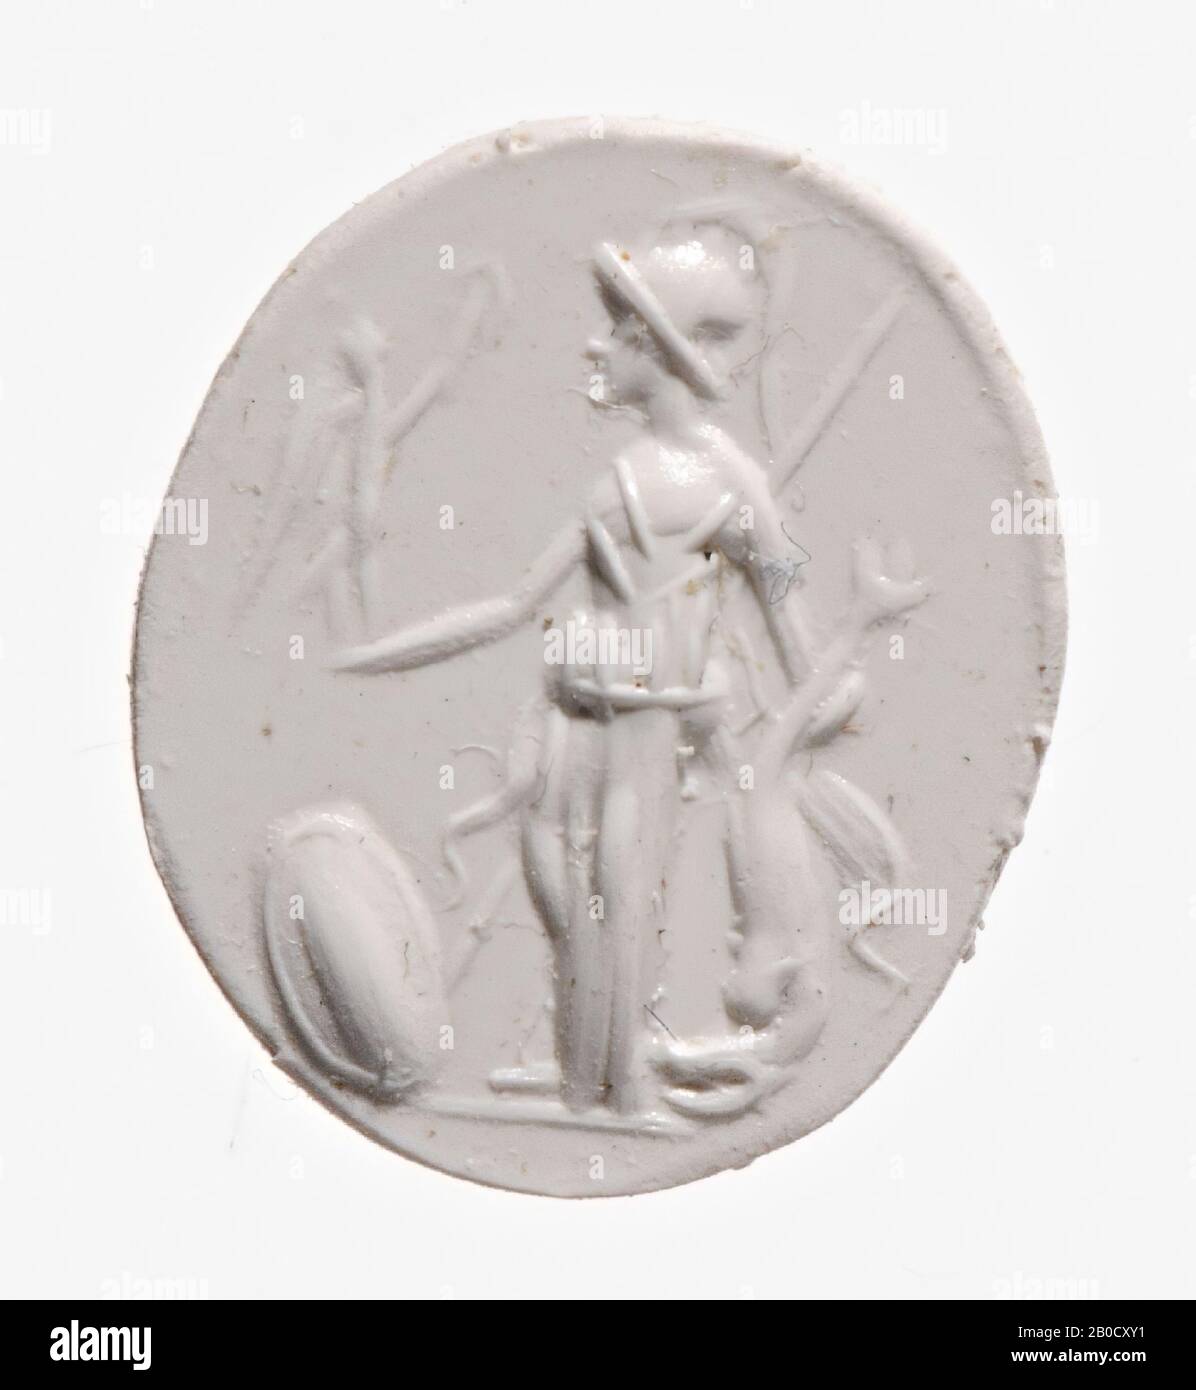 Vz: the goddess wears a helmet with comb and a big change (apoptygma), on her outstretched left hand a Nike-Victoriola, in her right hand she has a big dolphin at the tail, the dolphin is upside down pictured, behind the goddess a spear and for her a shield., gem, intaglio, ringstone, carnelian, Color: orange-red, Shape: oval, Processing: edge at the back receded compared to front, Method: streaky body modellig with rounded drills, detailing with streaky rounded wheel grooves., 13 x 10 mm, D. 2.5 mm, 1st century AD. 1-100 AD Stock Photo